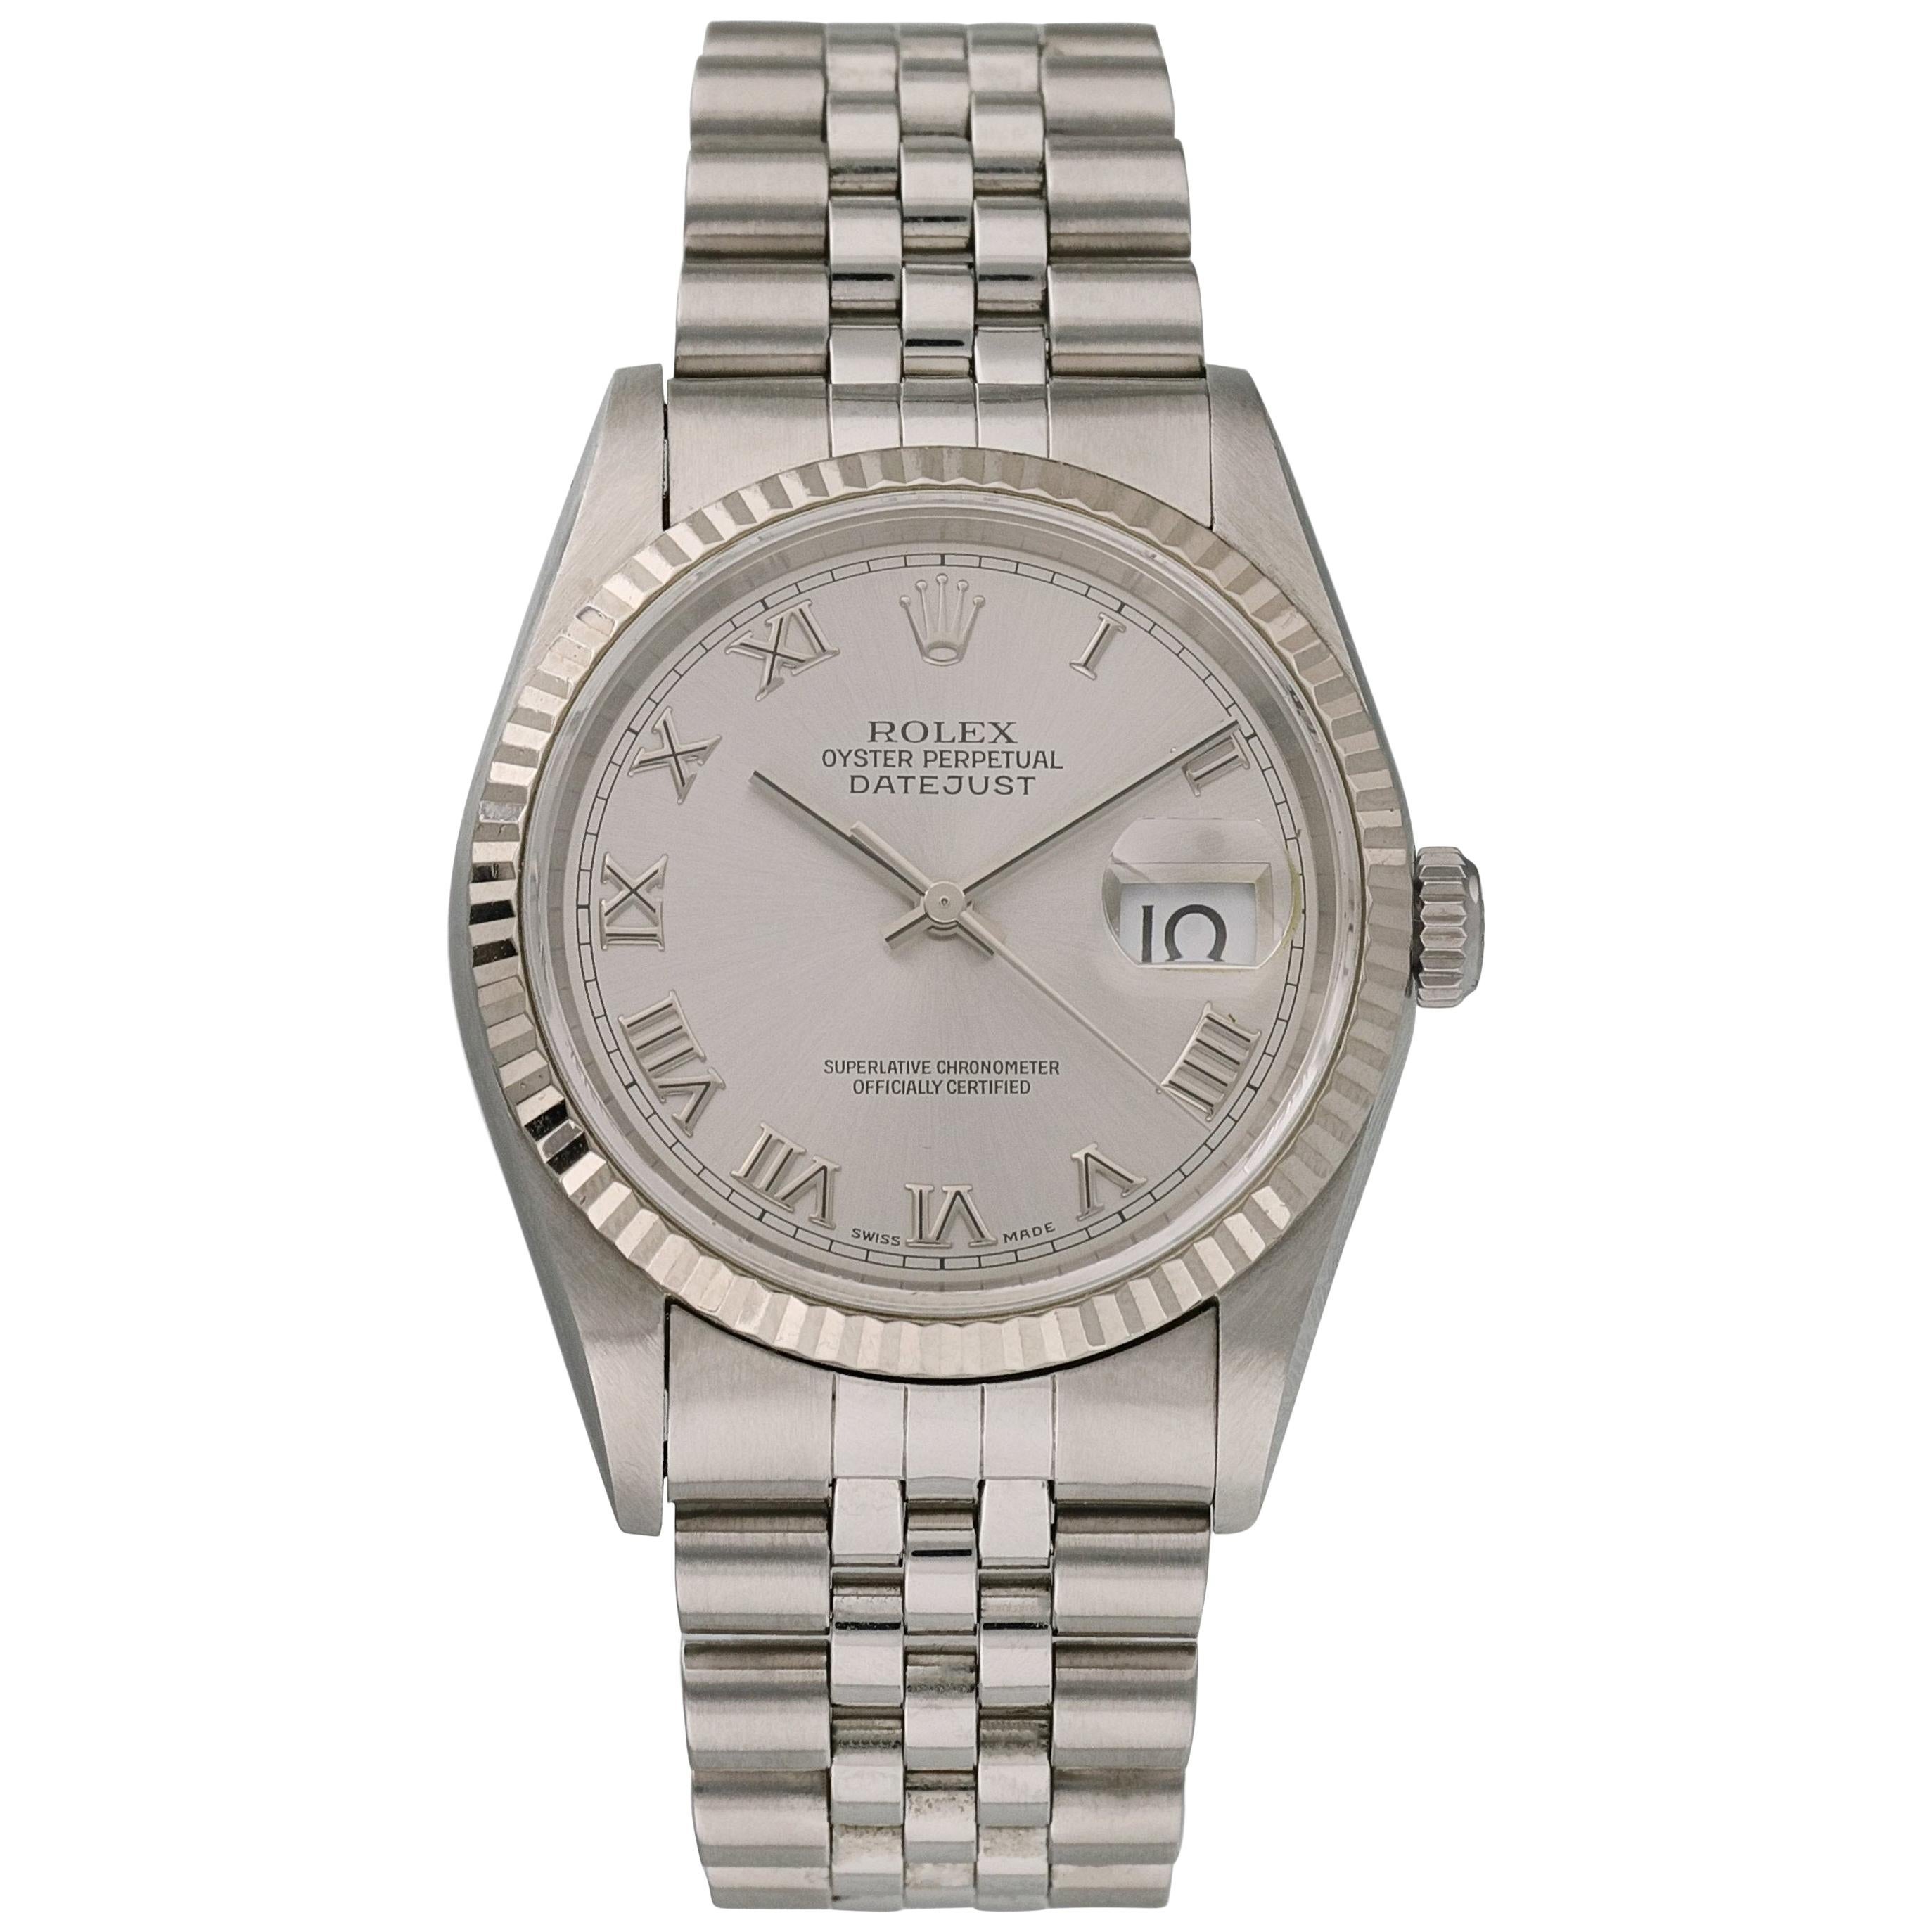 Rolex Oyster Perpetual Datejust 16234 Men's Watch For Sale